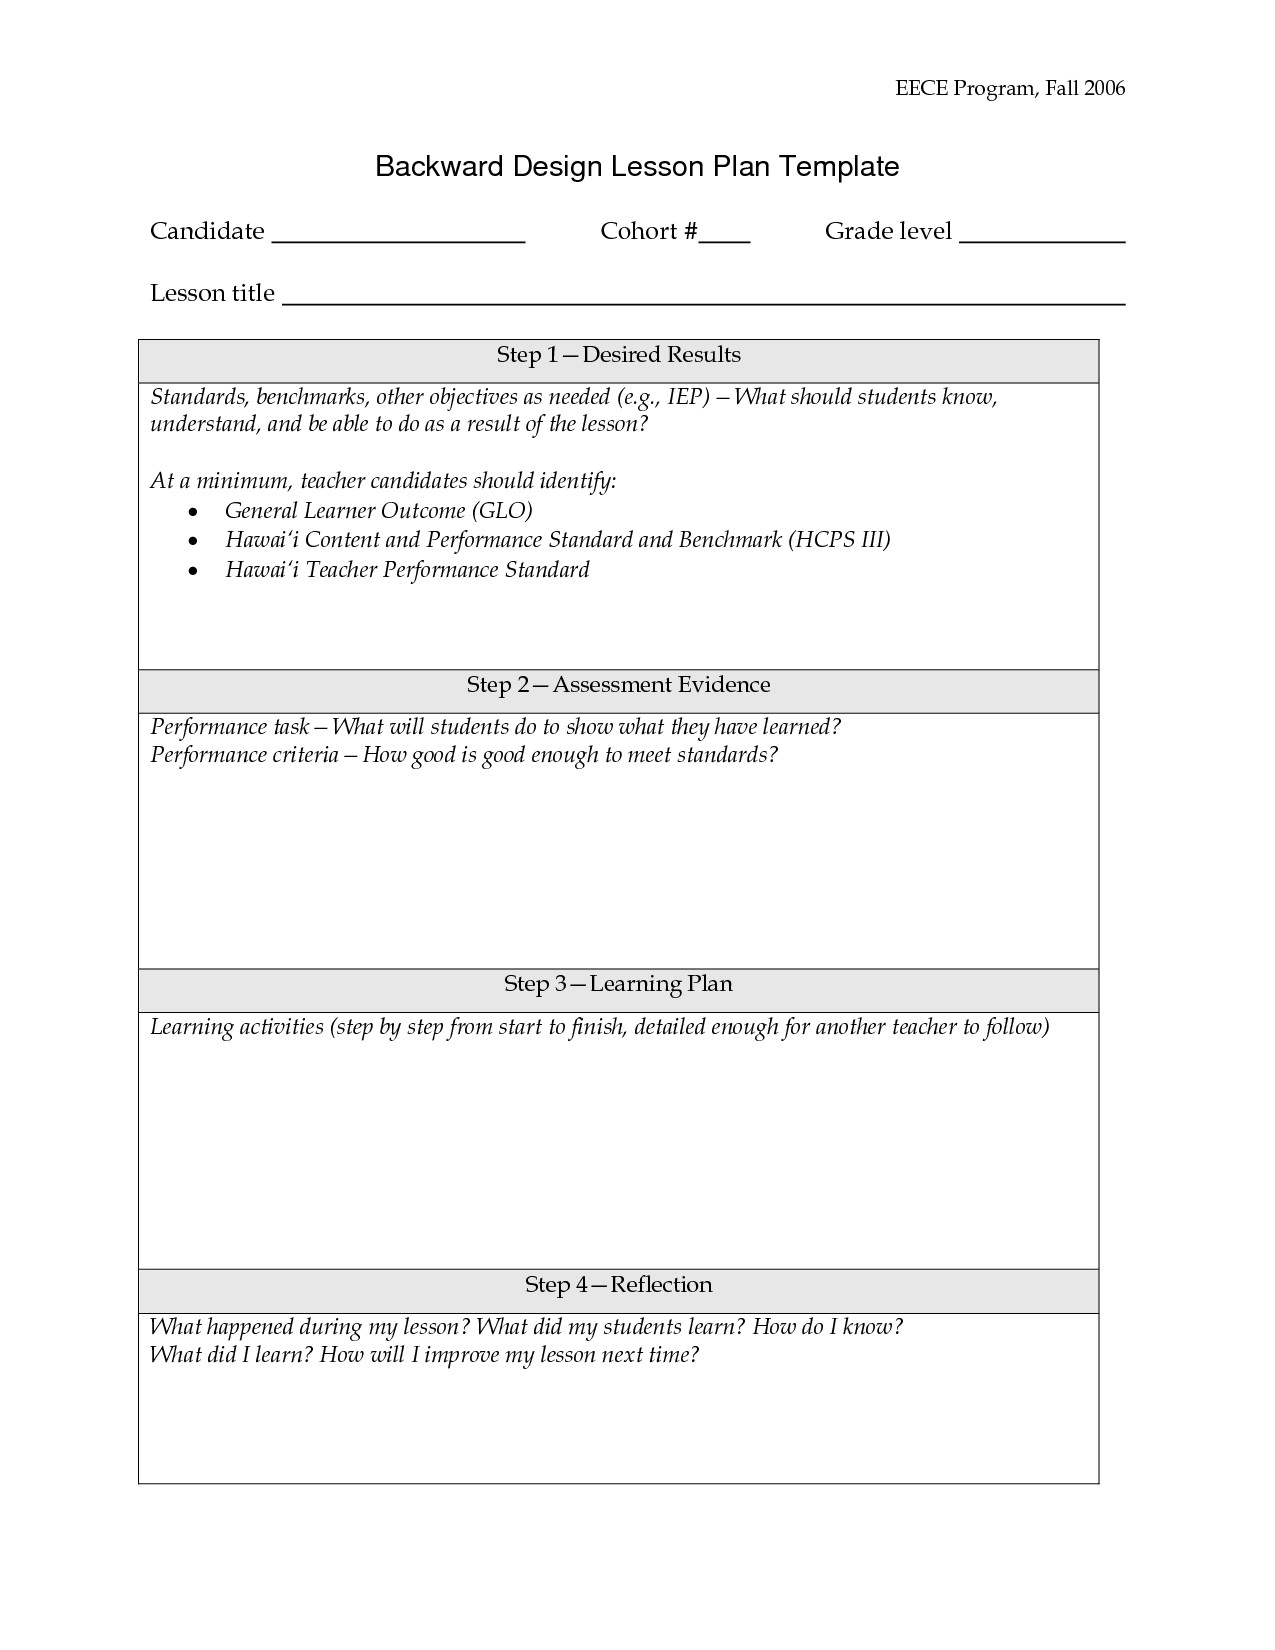 Backwards by Design Lesson Plan Template Backward Planning Template Backward Design Lesson Plan